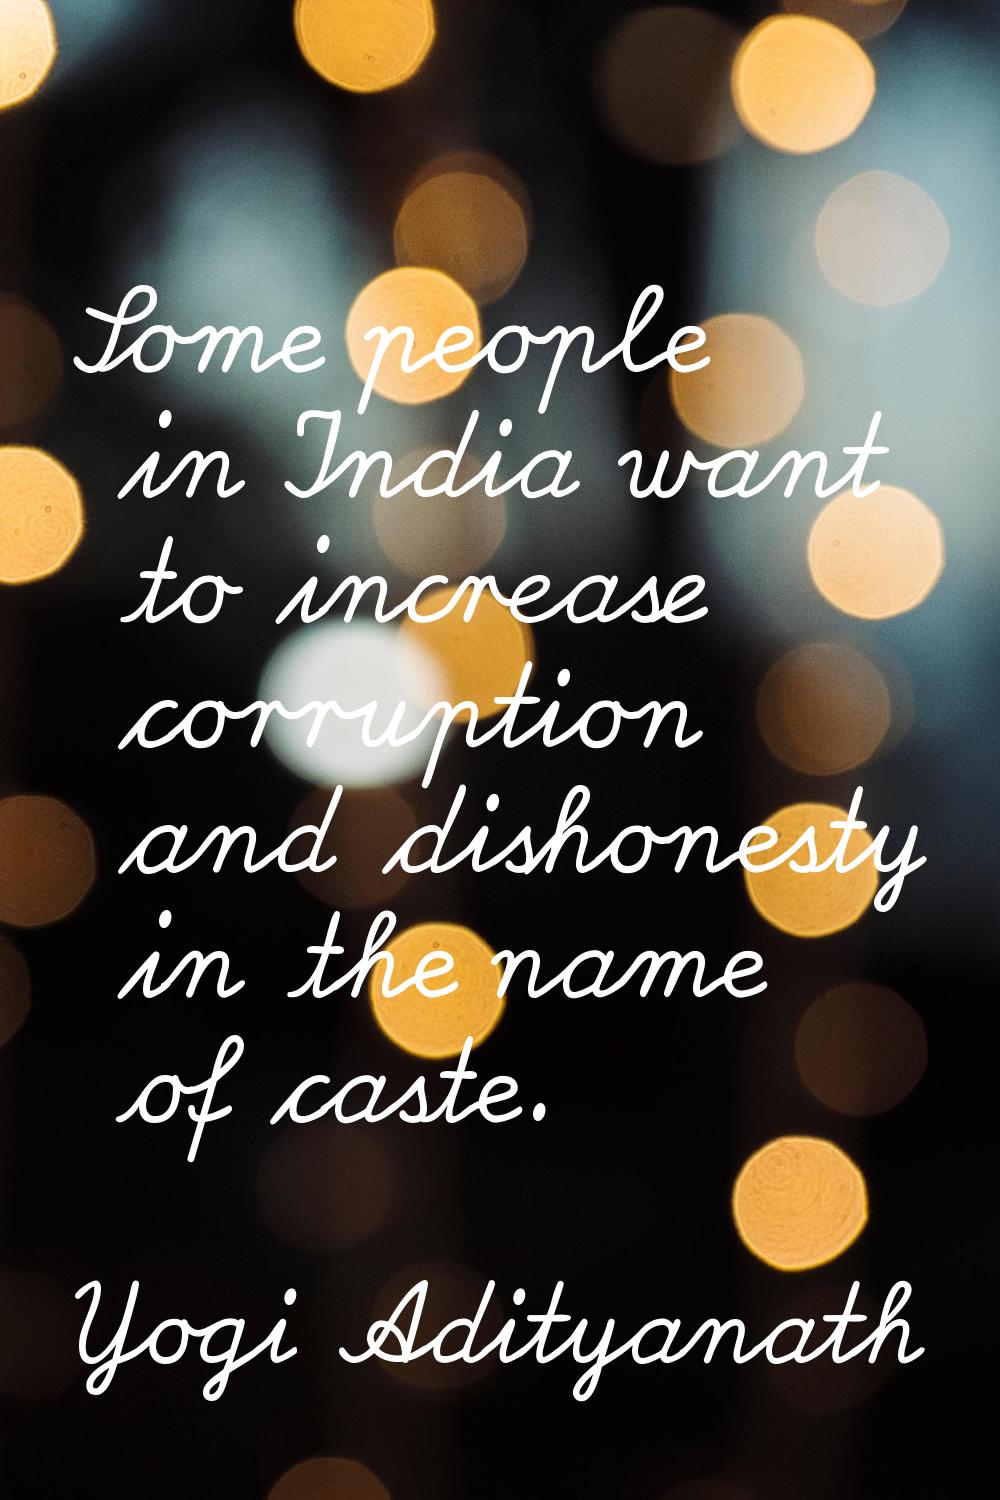 Some people in India want to increase corruption and dishonesty in the name of caste.